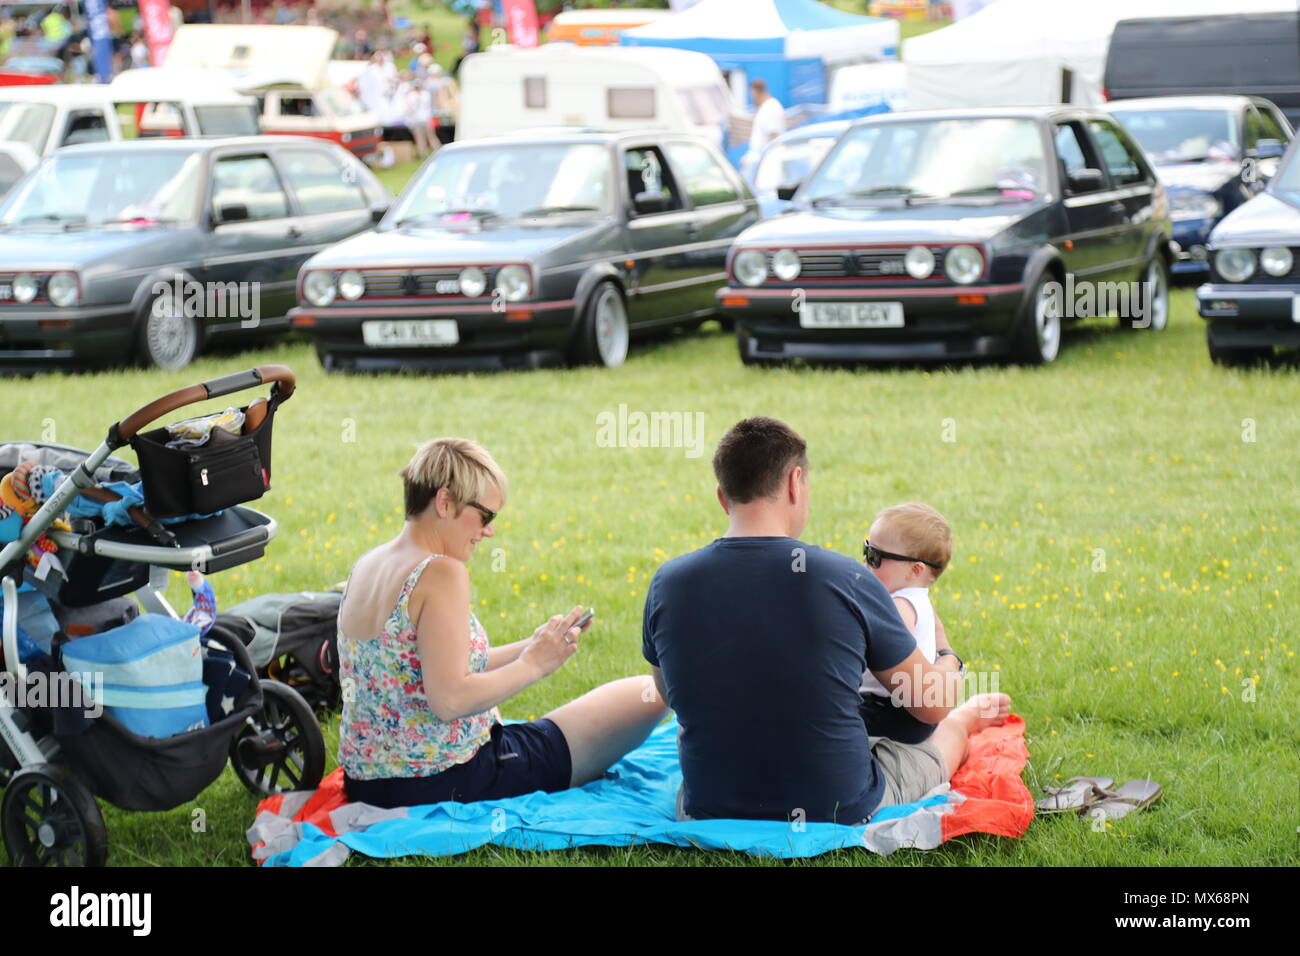 Stonor, Oxfordshire, UK. 3rd Jun, 2018. All types of historic Volkswagen cars and vans were displayed at this years's gathering of their owners. Fans could get close to well-loved vehicles from the German car manufacturer, which created its reputation for durability  and Hippie appeal in the 60s. Credit: Uwe Deffner/Alamy Live News Stock Photo